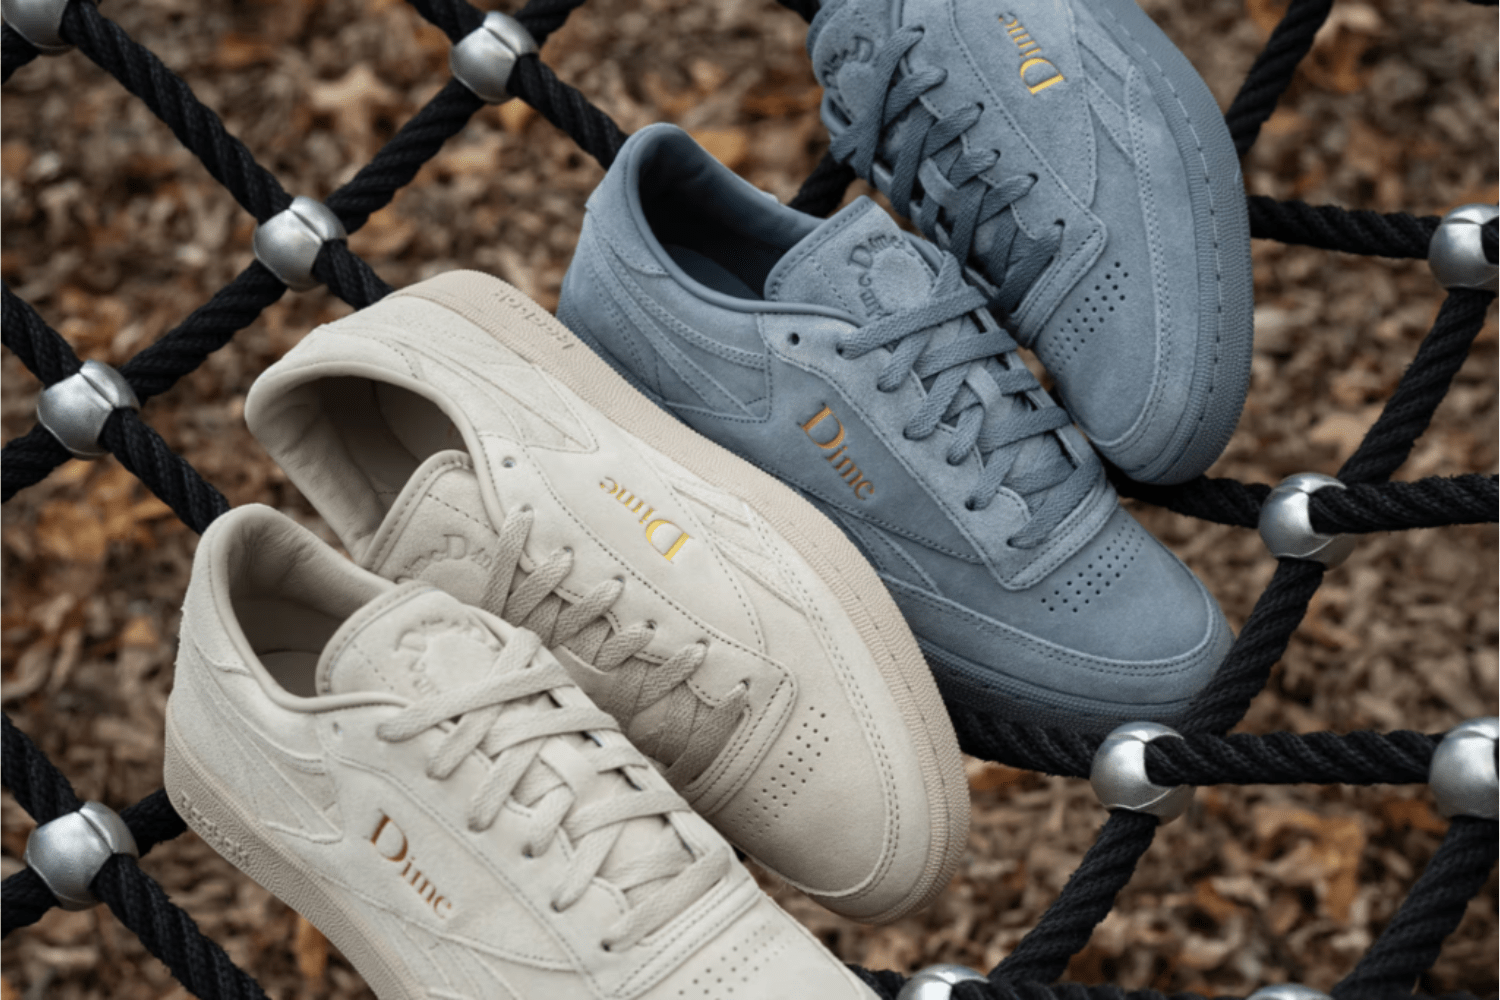 Dime and Reebok collaborate on Club C Revenge and Club C BULC